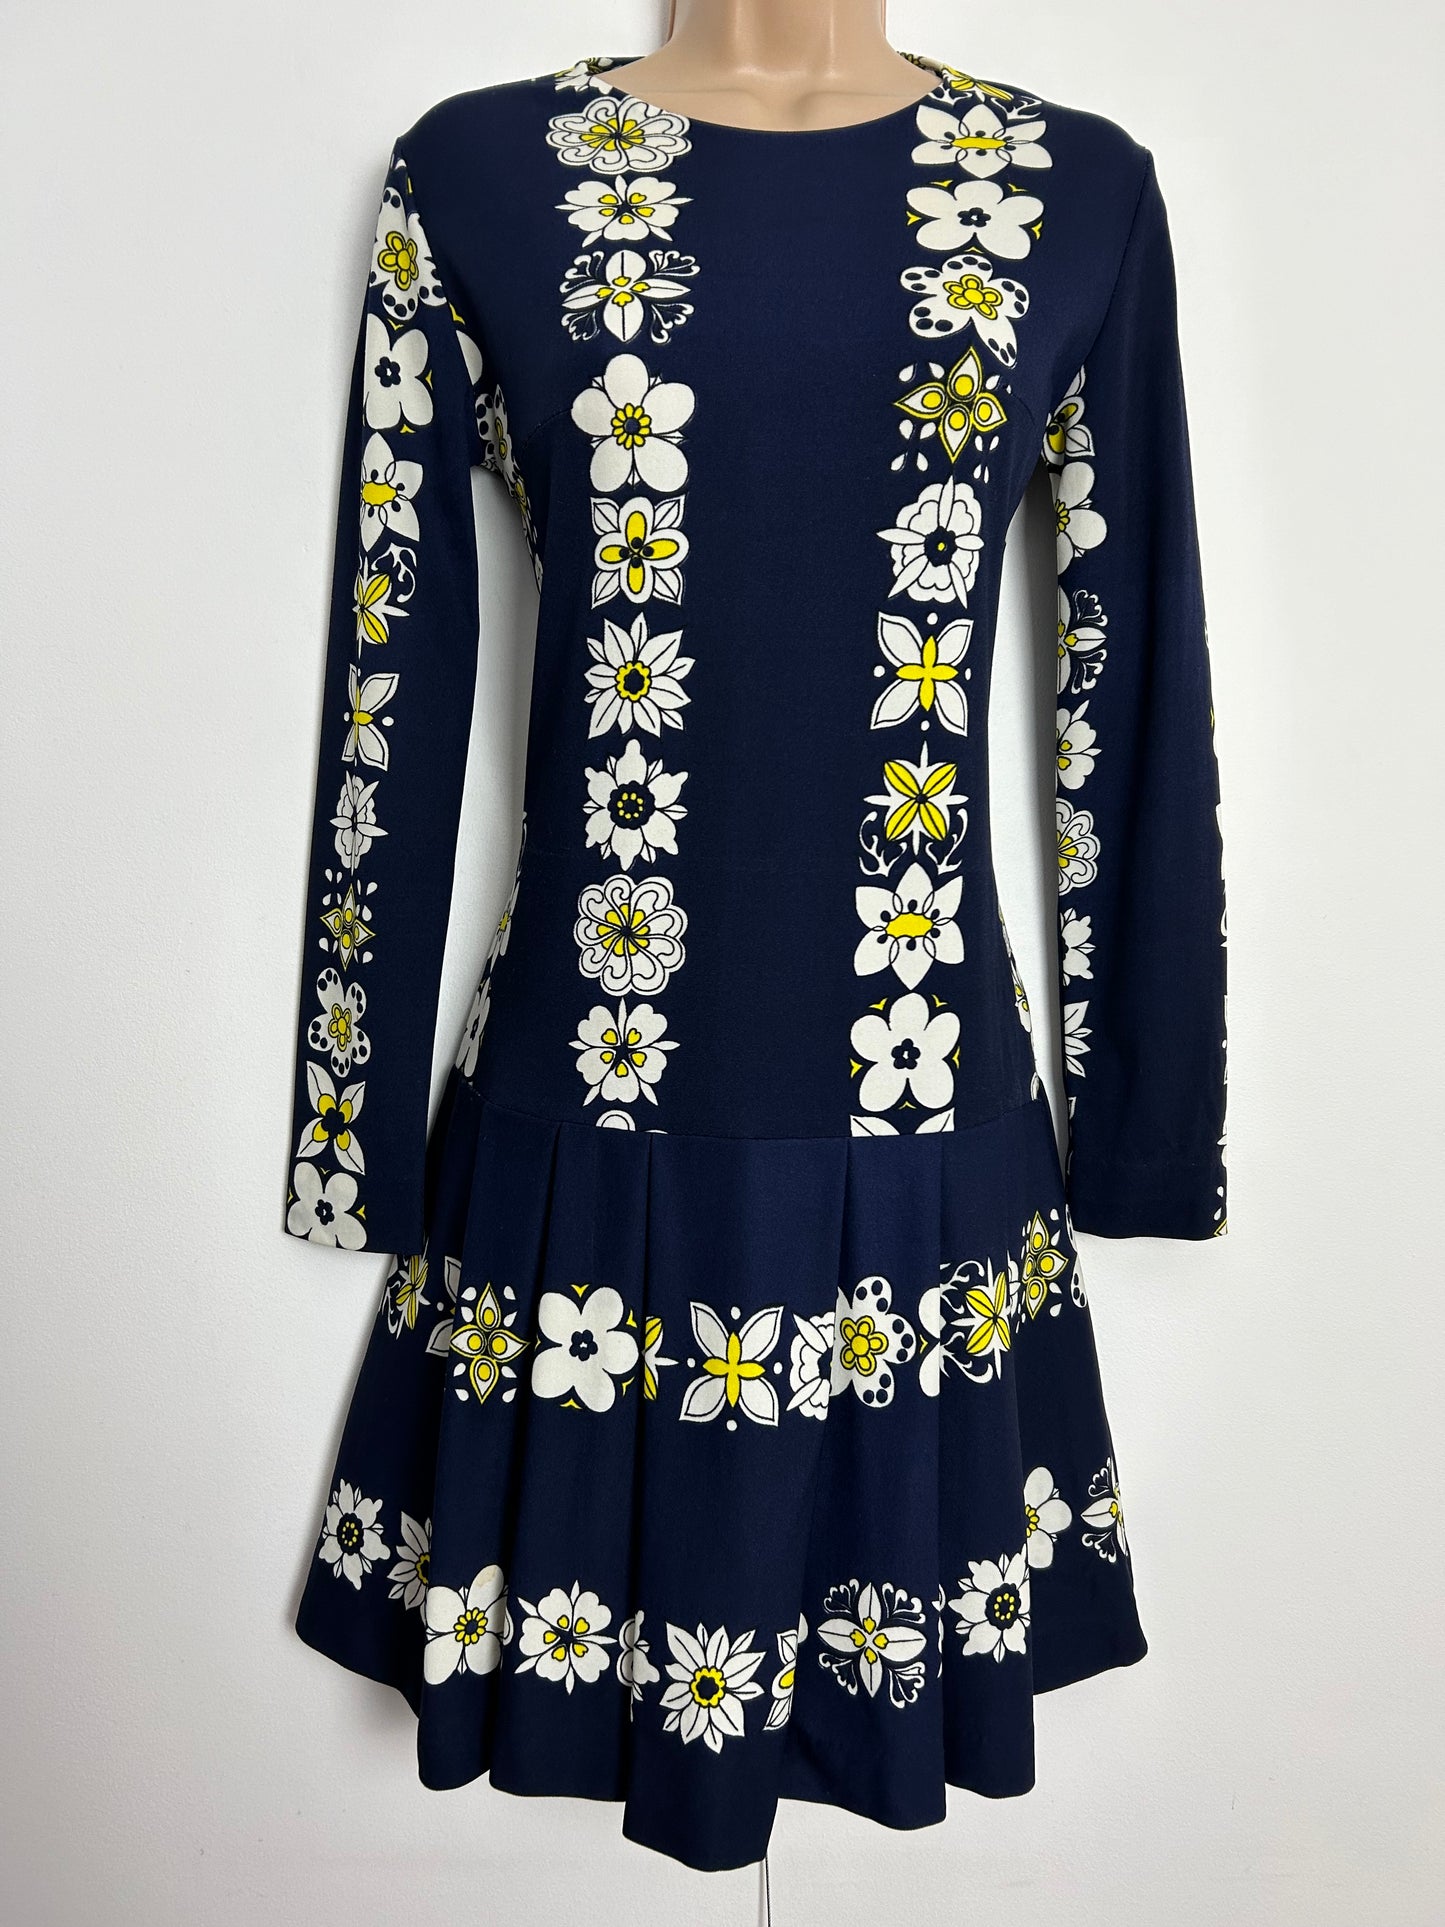 Vintage Early 1970s UK Size 8 Navy Blue White & Yellow Floral Print Long Sleeve Pleated Shift Dress